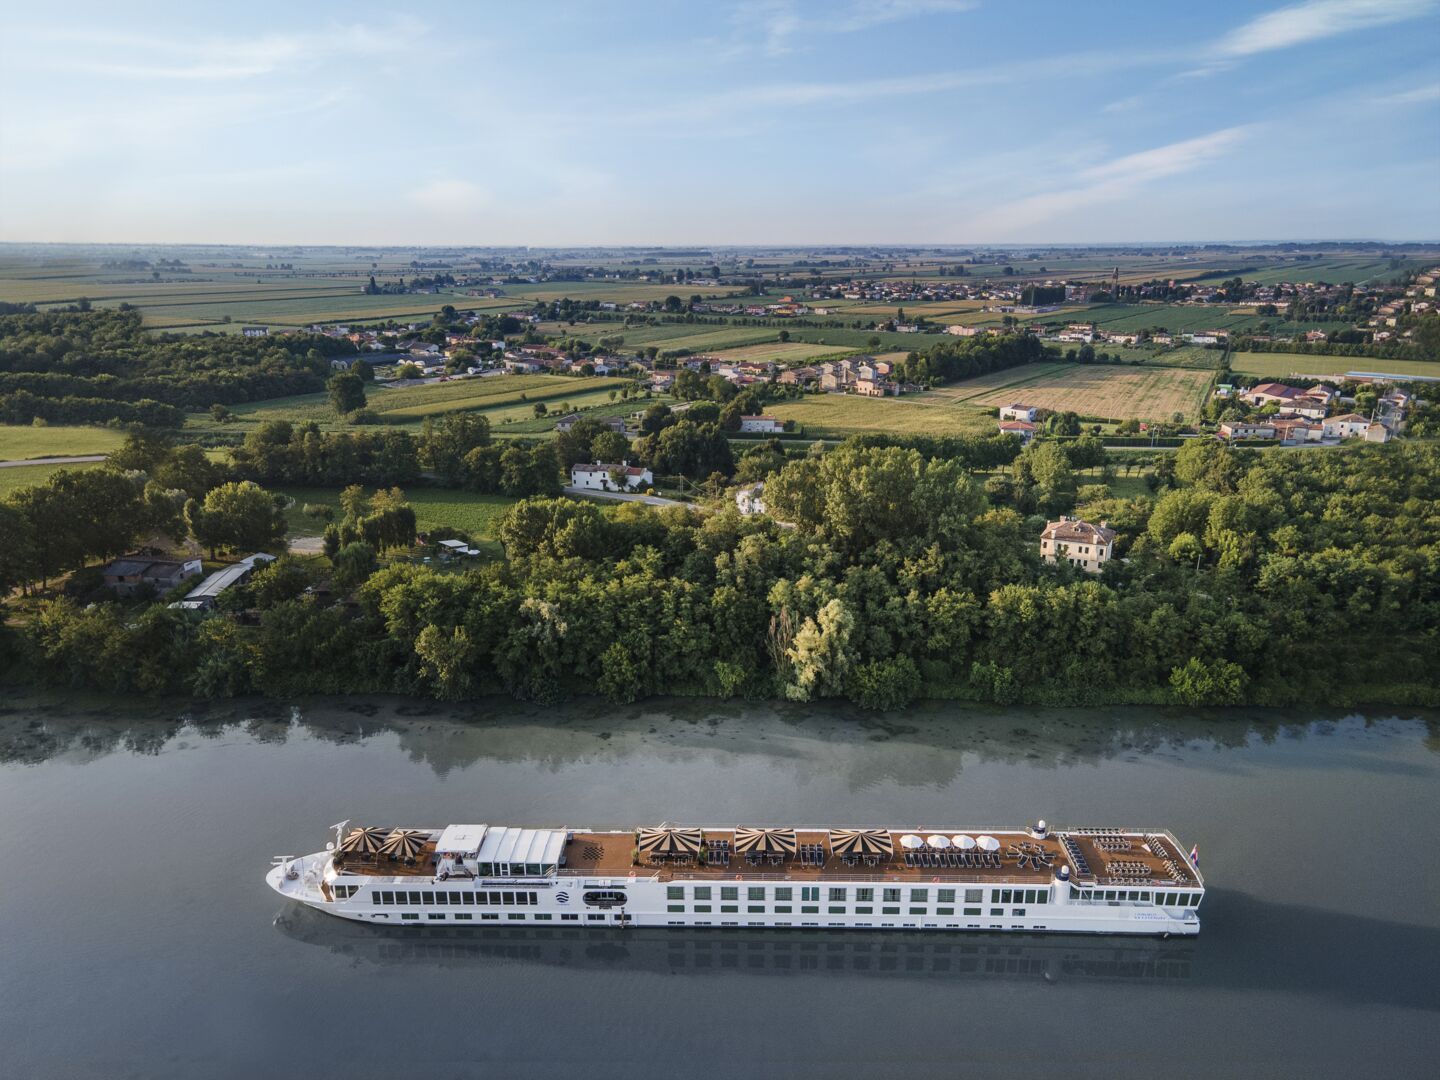 <p>A voyage through some of Europe’s most picturesque waterways on a small cruise ship is the perfect way to explore more of a region than you might otherwise. And with some lovely boutique ships taking to Europe’s rivers on dazzling itineraries, there’s never been a better time to explore our home continent.</p><p>We've rounded up the best river cruises for a boutique sailing this year. From the Douro to the Rhone, Europe has some of the world's most scenic rivers that are best experienced on a small ship.</p><p>River cruises are also the perfect introduction to cruise holidays for first-time cruisers. And those who already know and love the joy of discovering destinations by small ship will enjoy exploring new itineraries accompanied by famous faces.</p><p>Check out Good Housekeeping's pick of the best river cruises for 2023.</p>